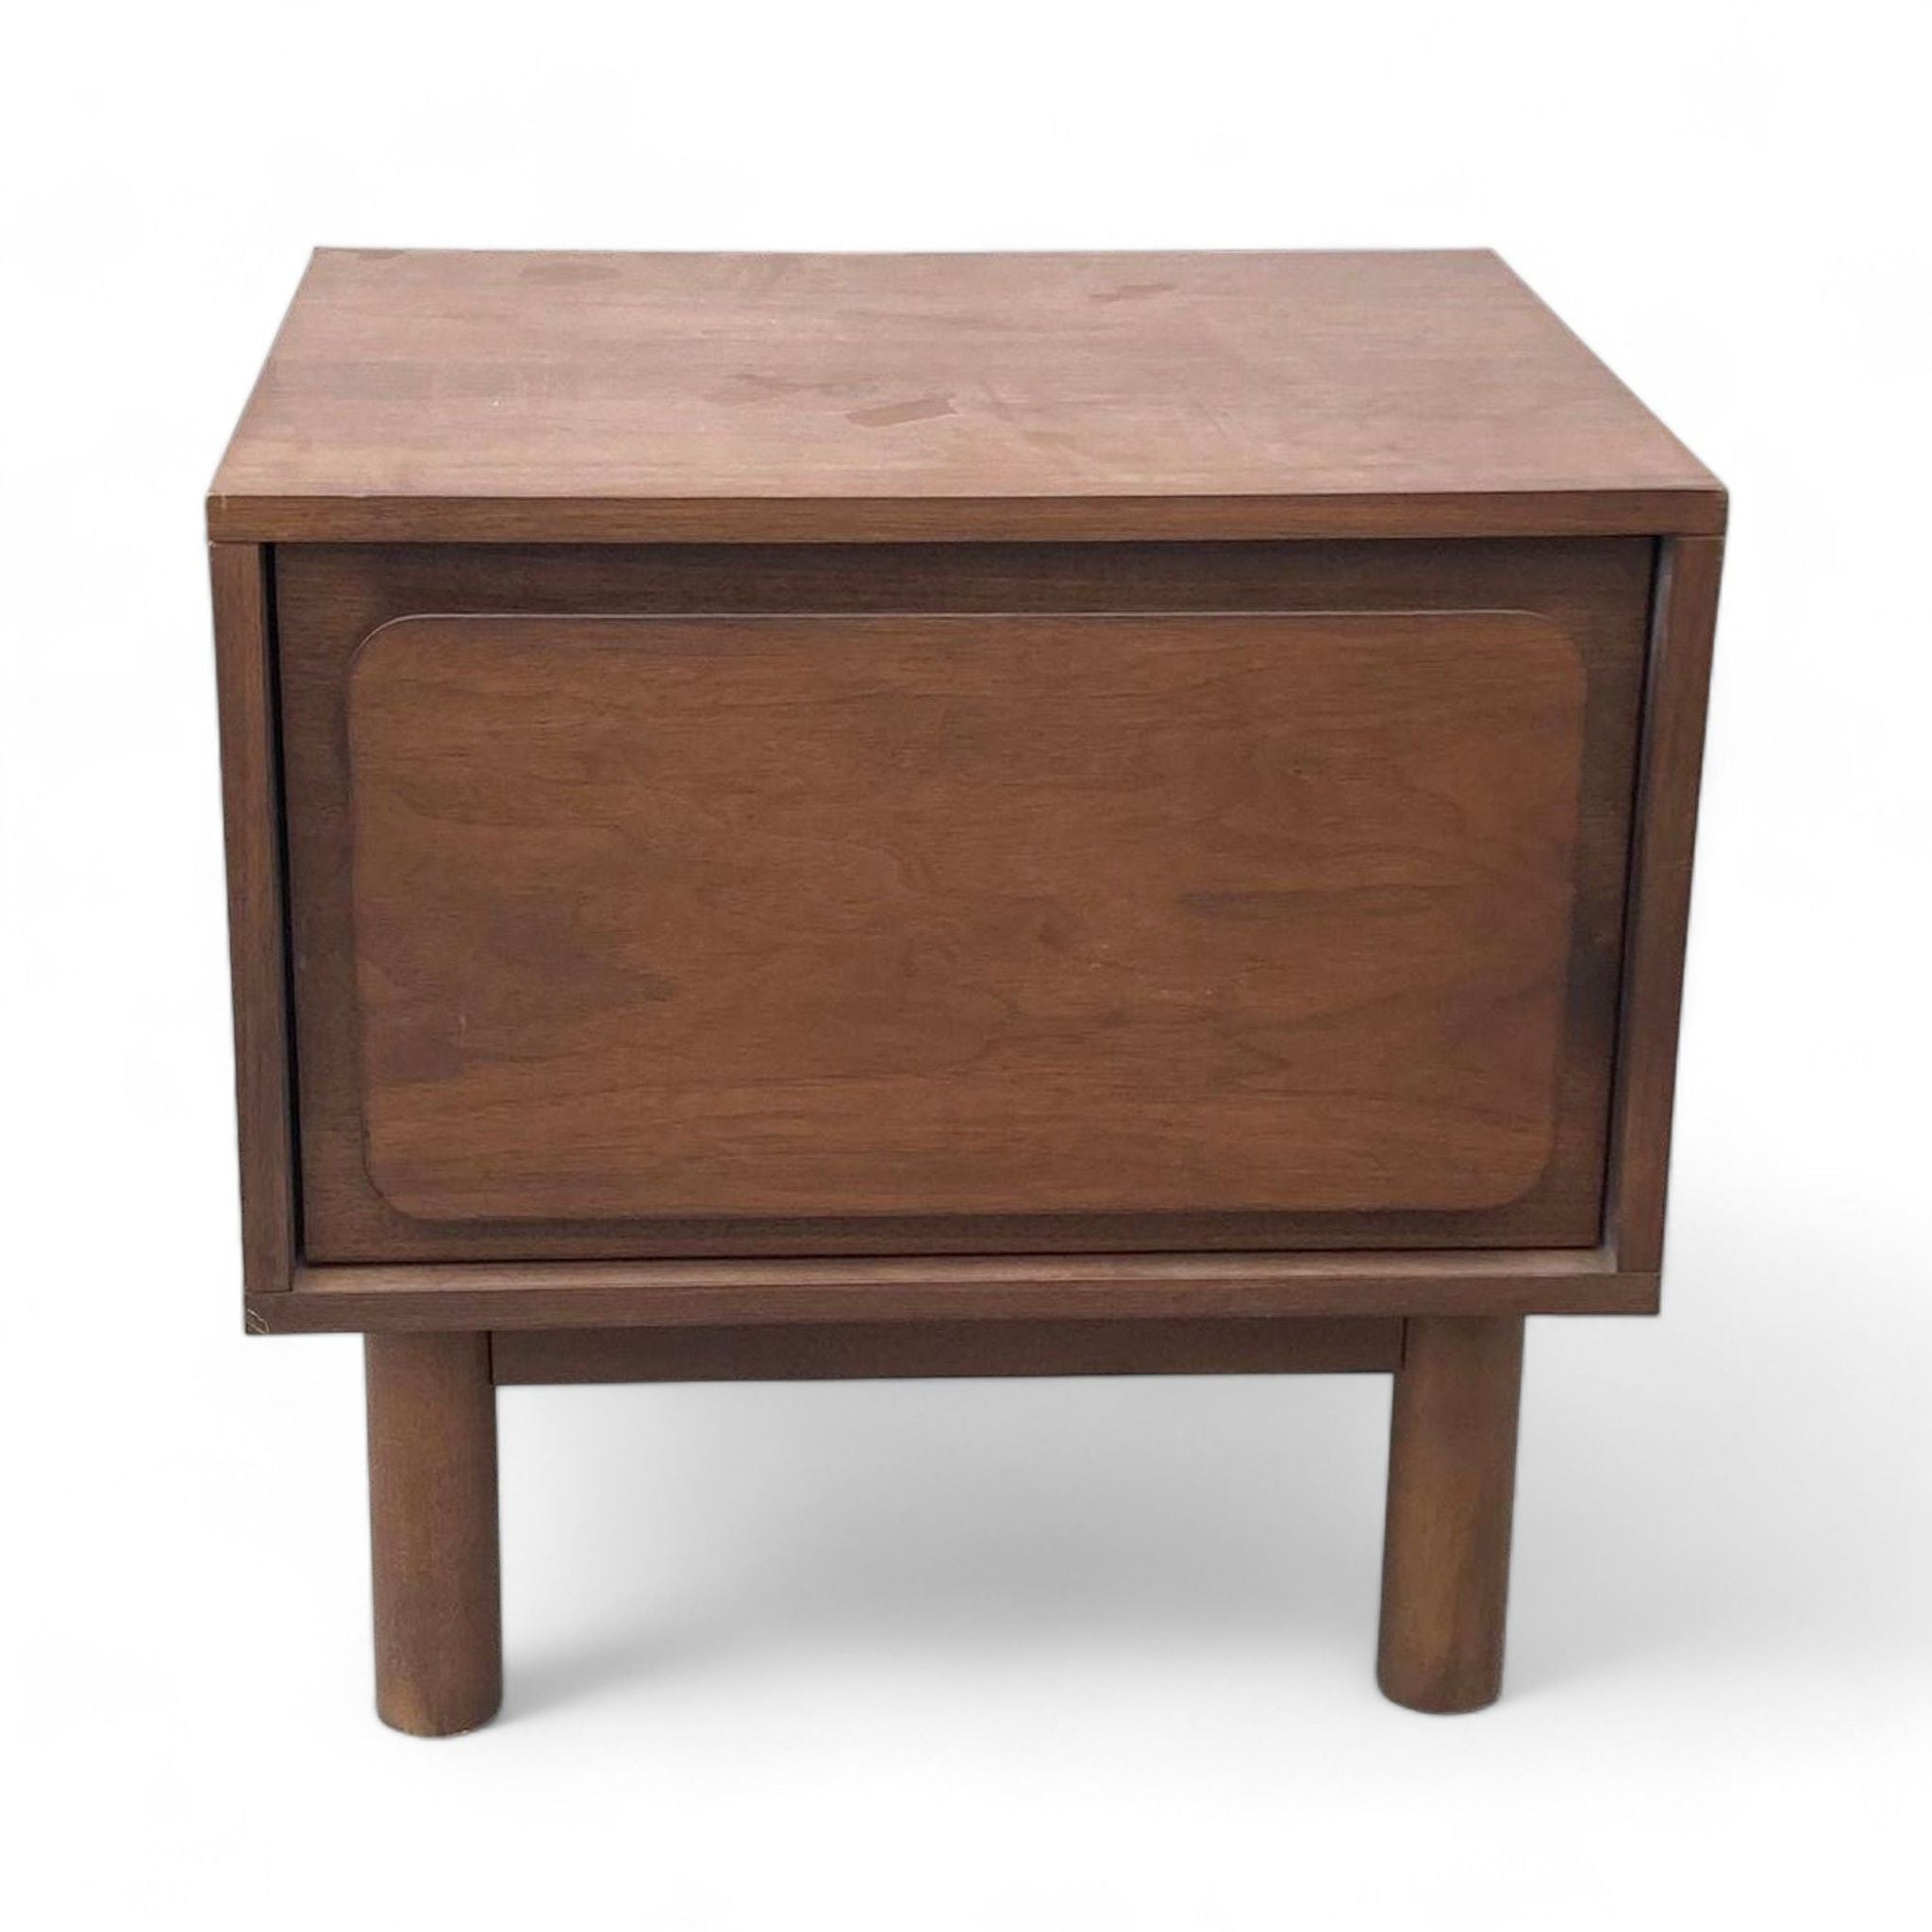 1. West Elm end table in dark walnut with closed drawer and round tapered legs on white background.